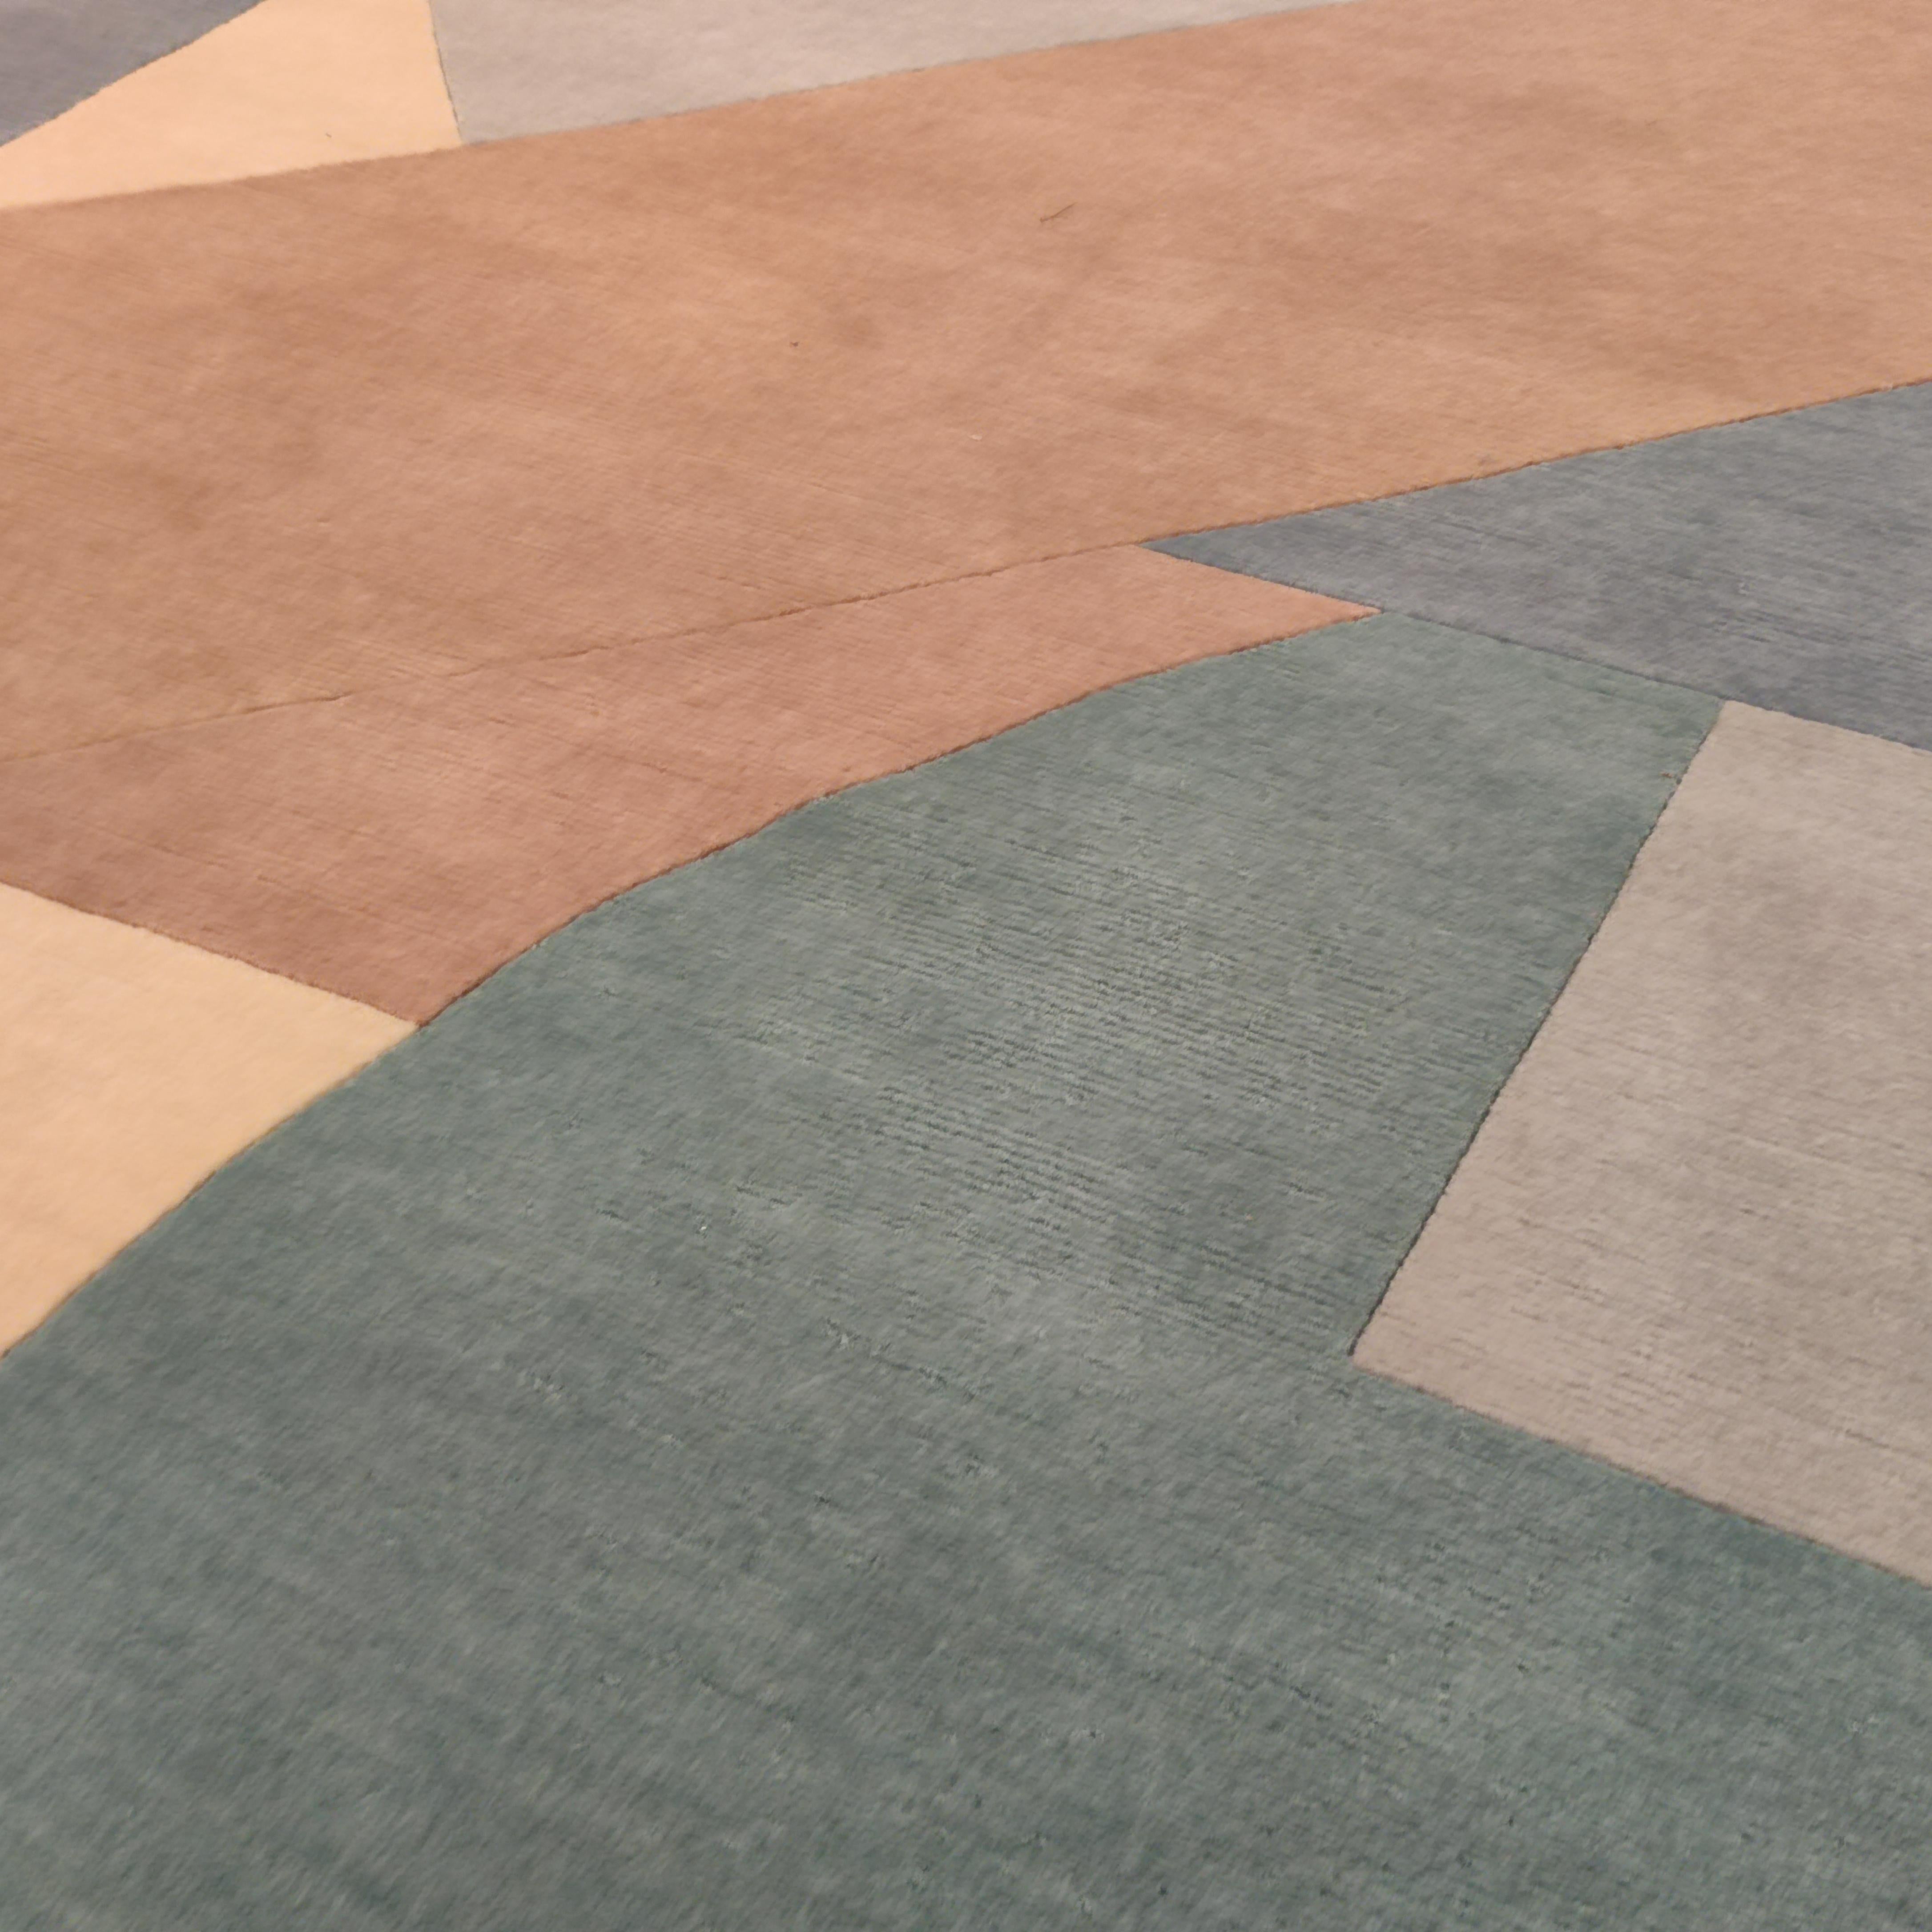 For Milan Design Week 2023, the Alberto Levi Gallery presented a series of new collections created in collaboration with the leading Milanese architect and interior designer Clara Bona. This has been Clara Bona's first venture in rug design,